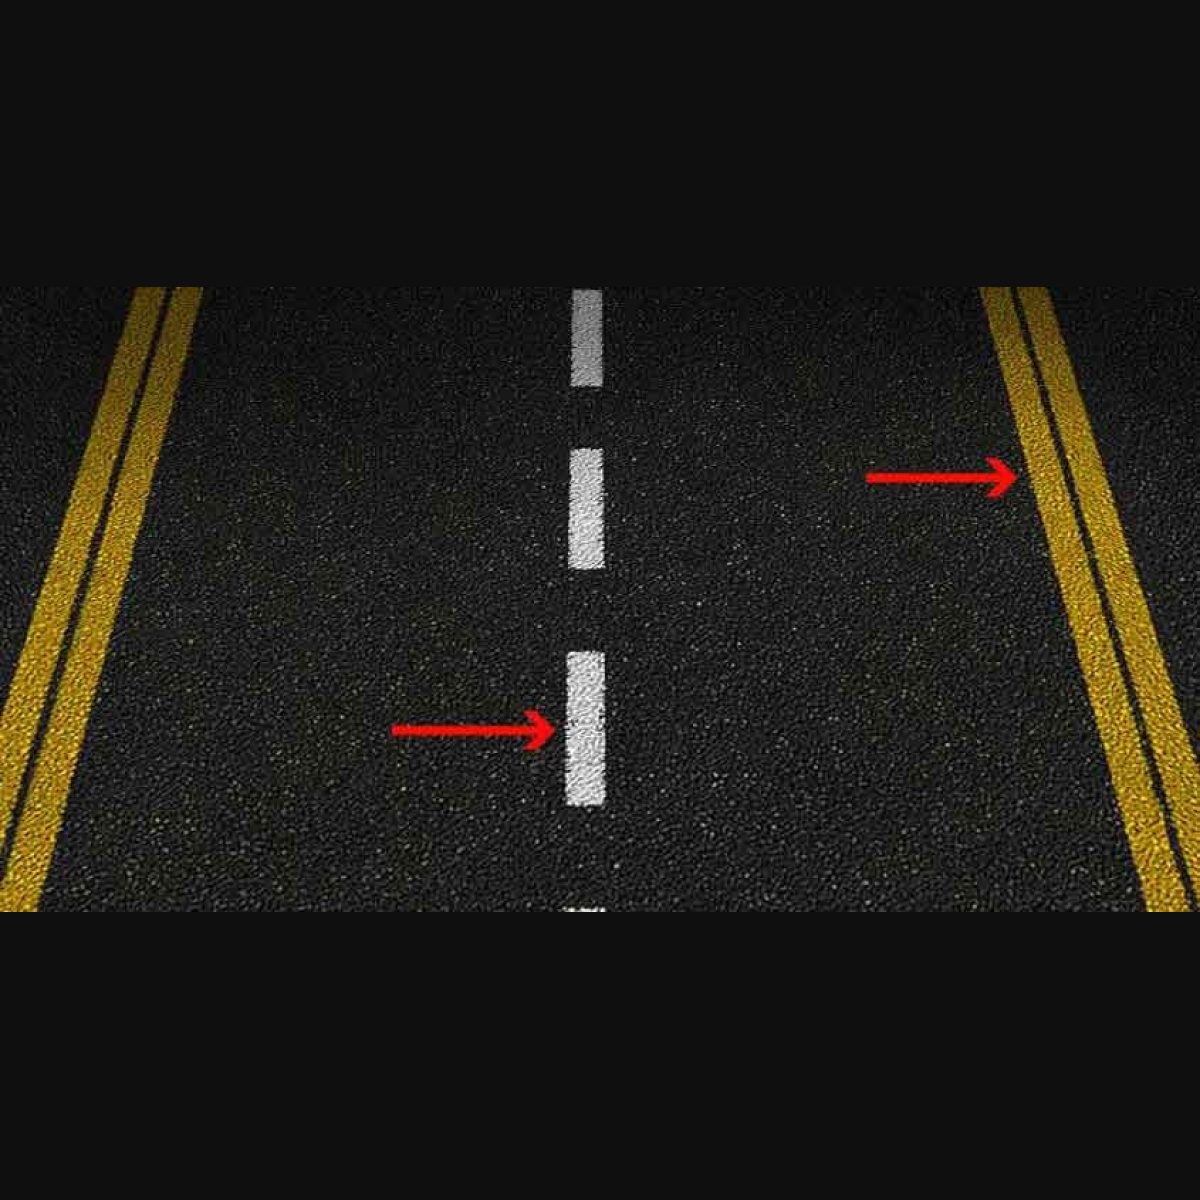 Markings on the Road